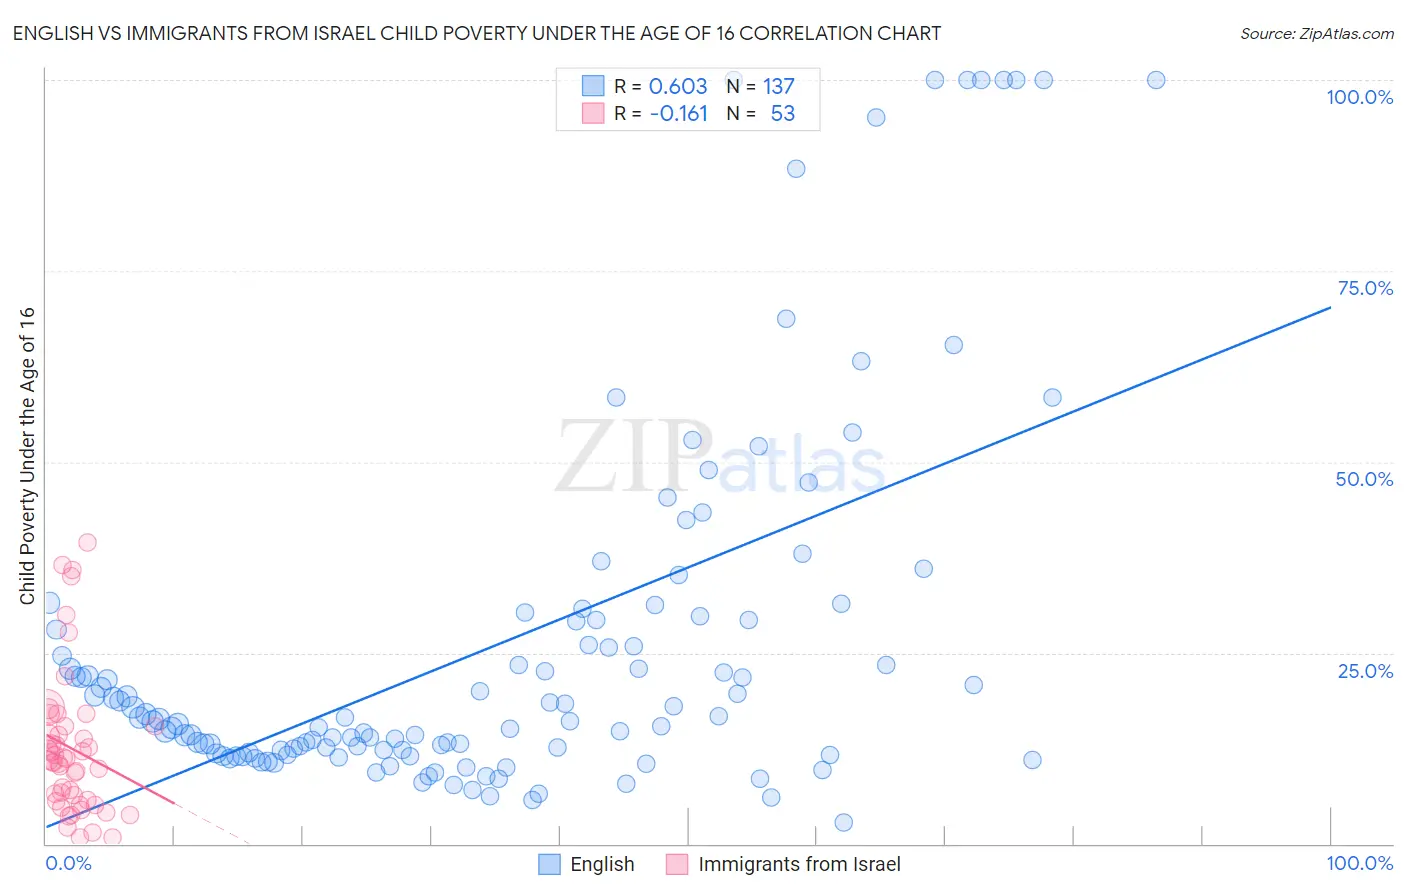 English vs Immigrants from Israel Child Poverty Under the Age of 16